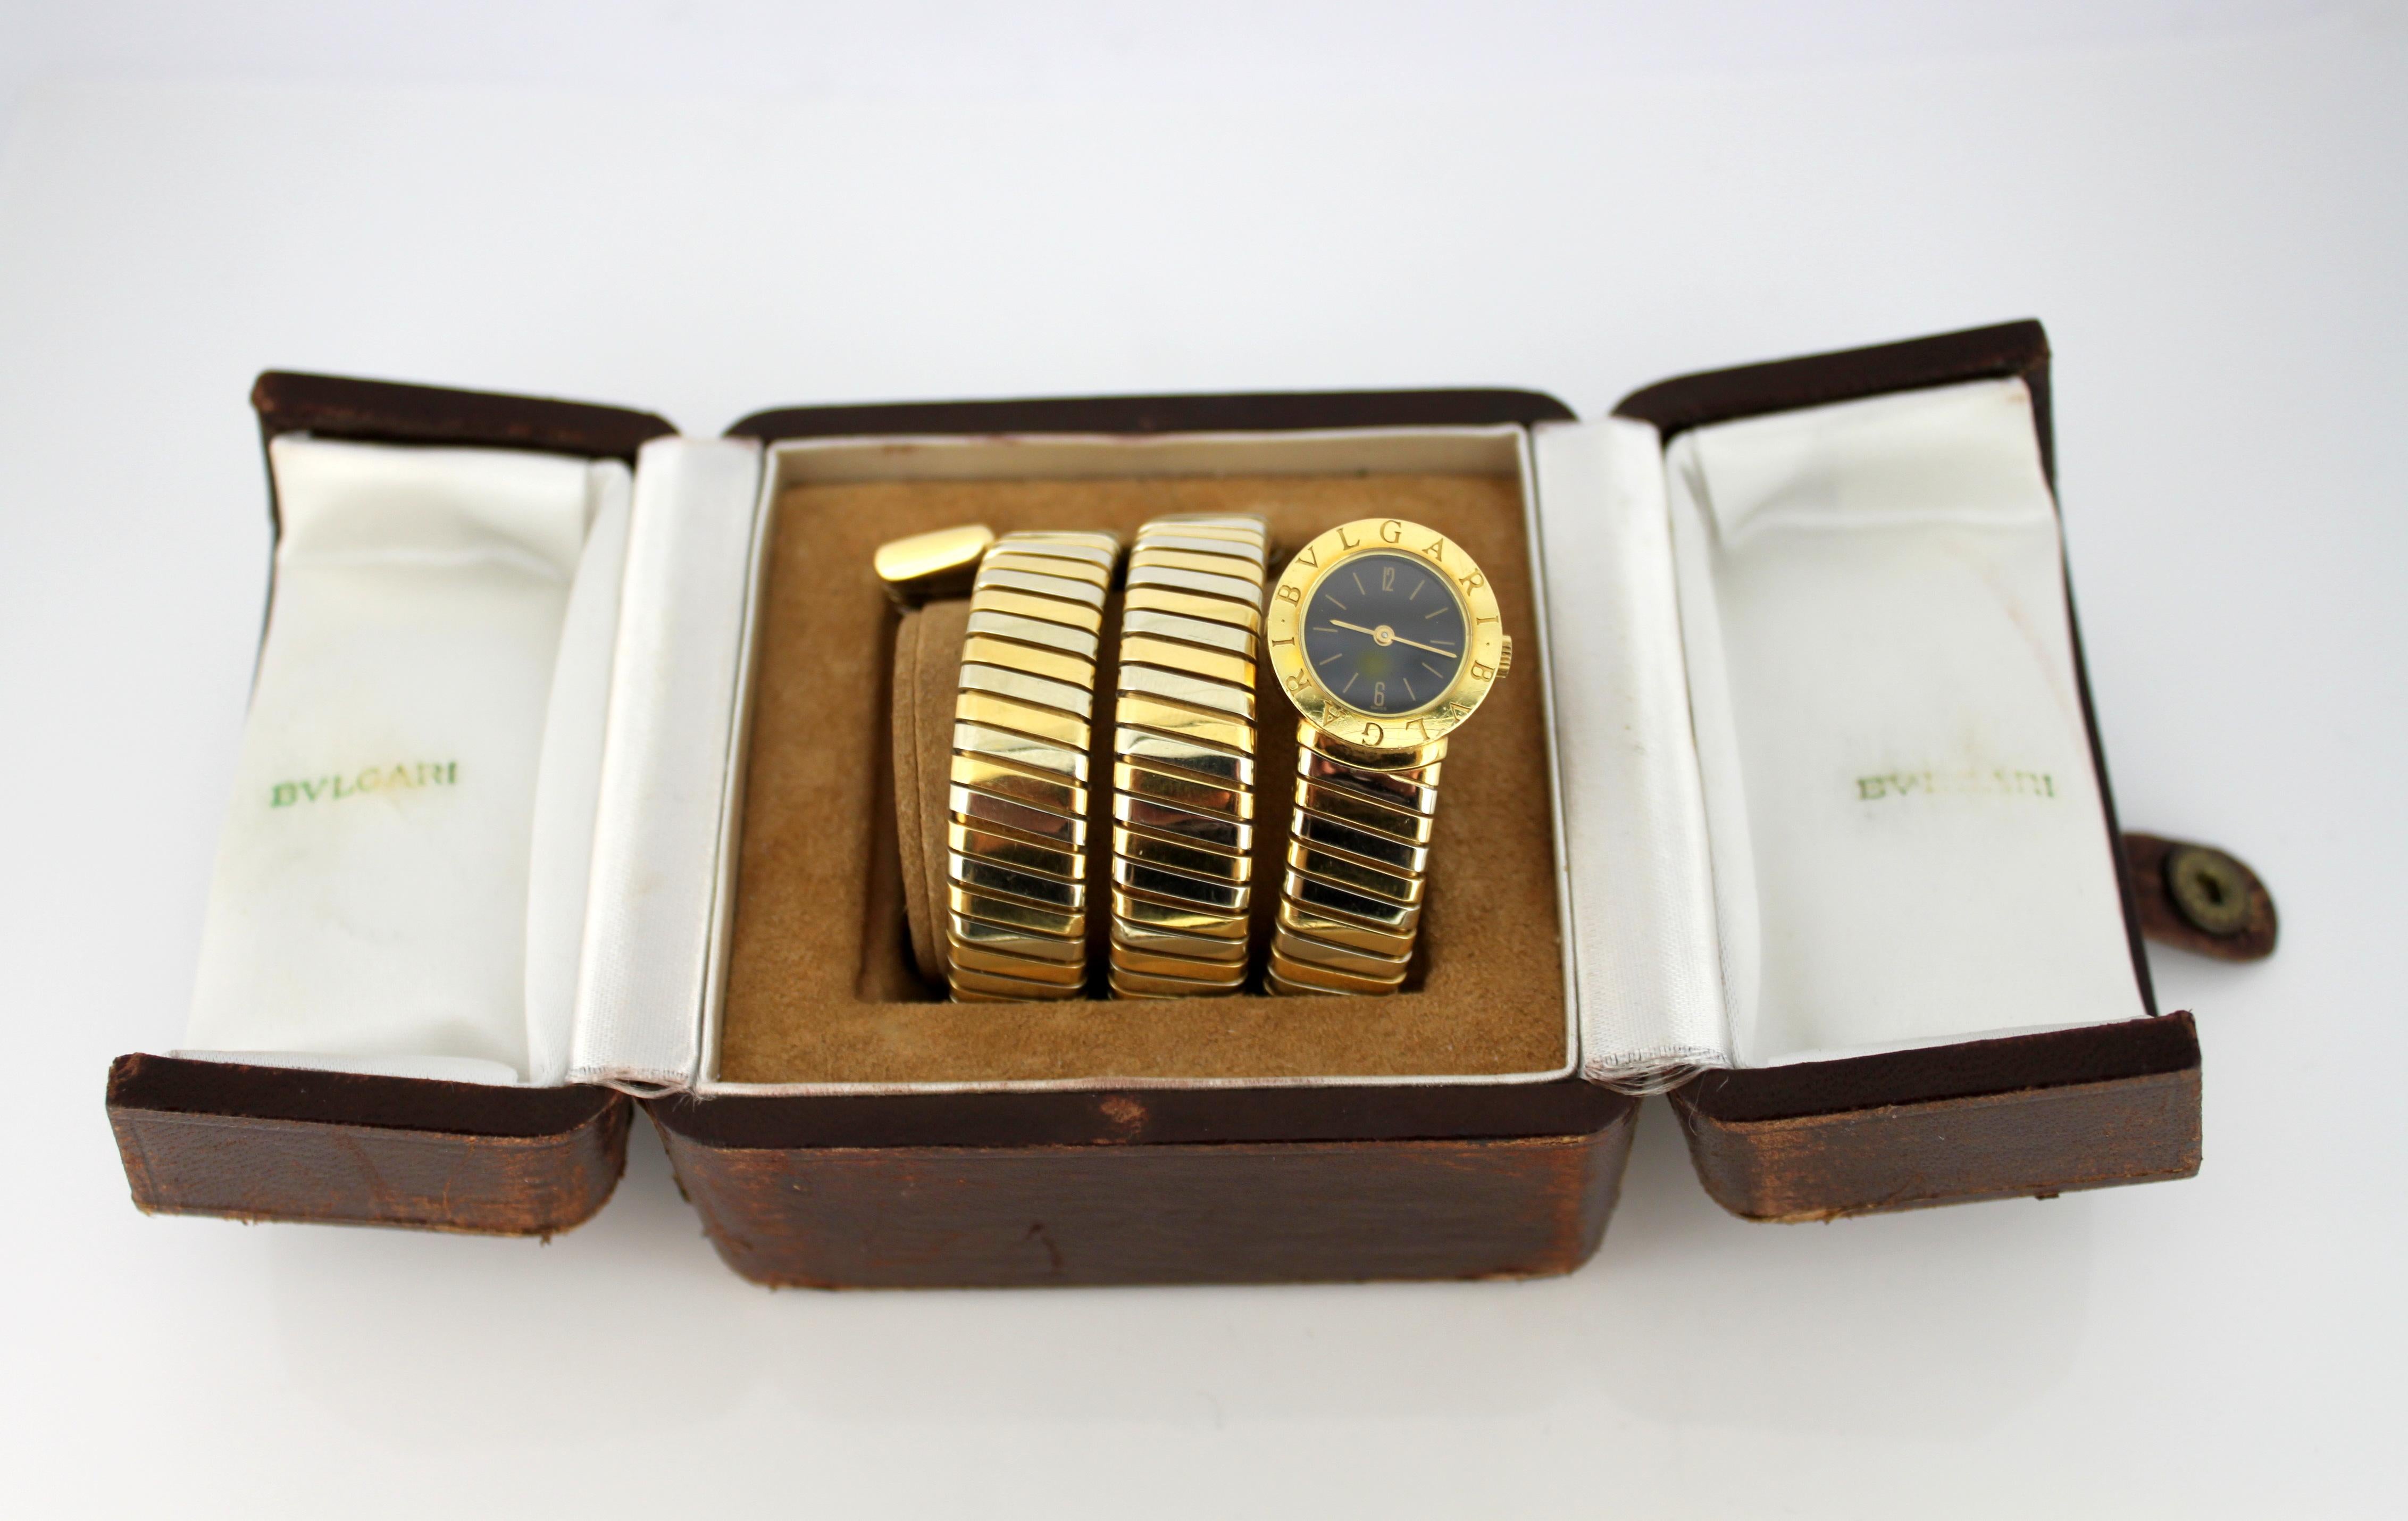 Bulgari Tri-Color Gold Serpenti Tubogas Snake Watch, Circa 1990's

Gender: Ladies
Case Diameter : 19 mm
Movement: Quartz
Watchband Material: 18k gold
Case material : 18k gold
Display Type:	Analogue	
Dial: Black ( See Photos )
Hands: Gold
Glass :